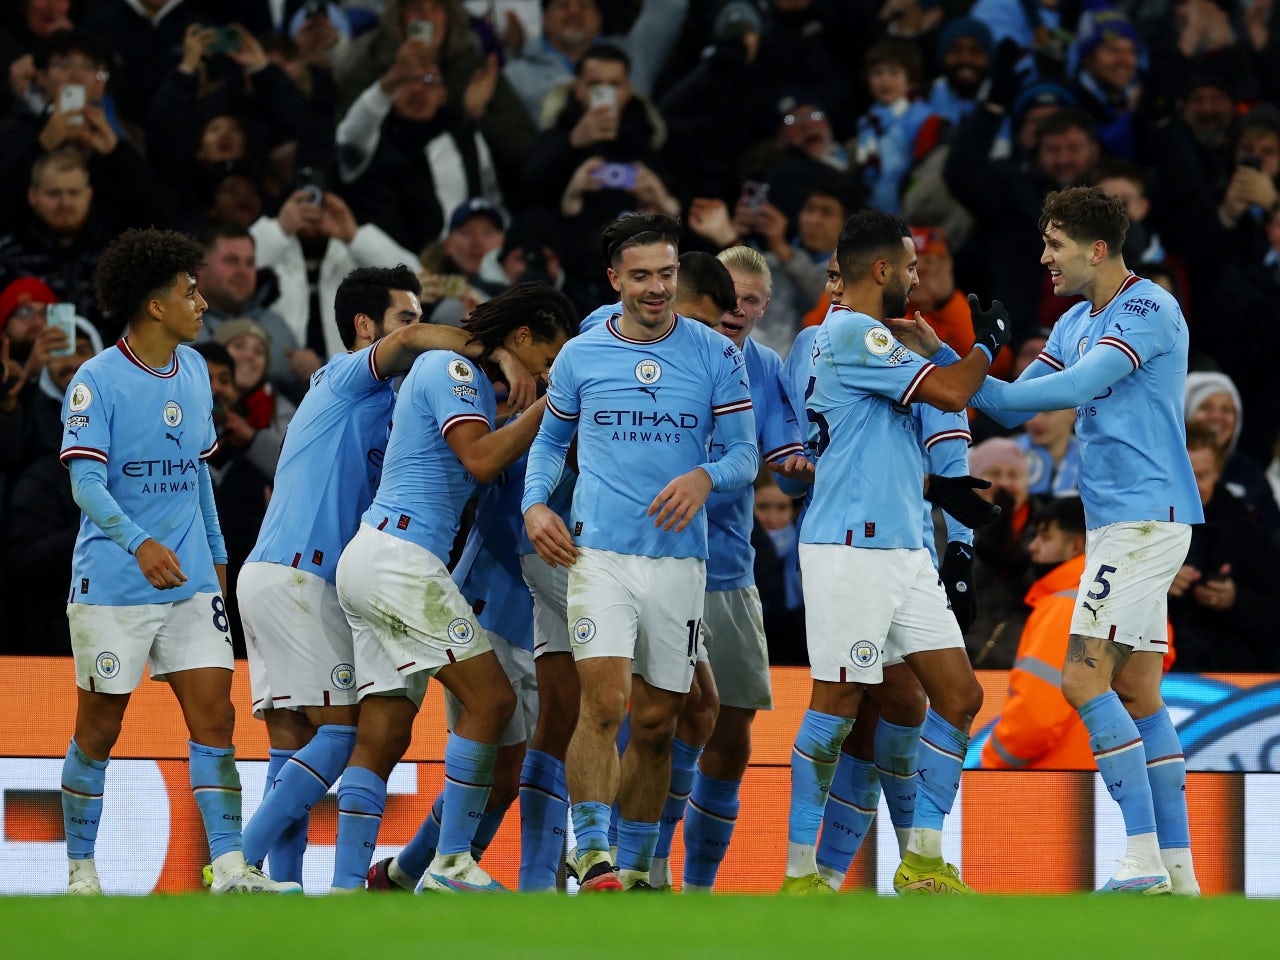 Highlights - Manchester City's Stunning Comeback Secures Victory Over Tottenham, Keeps Title Defense Alive